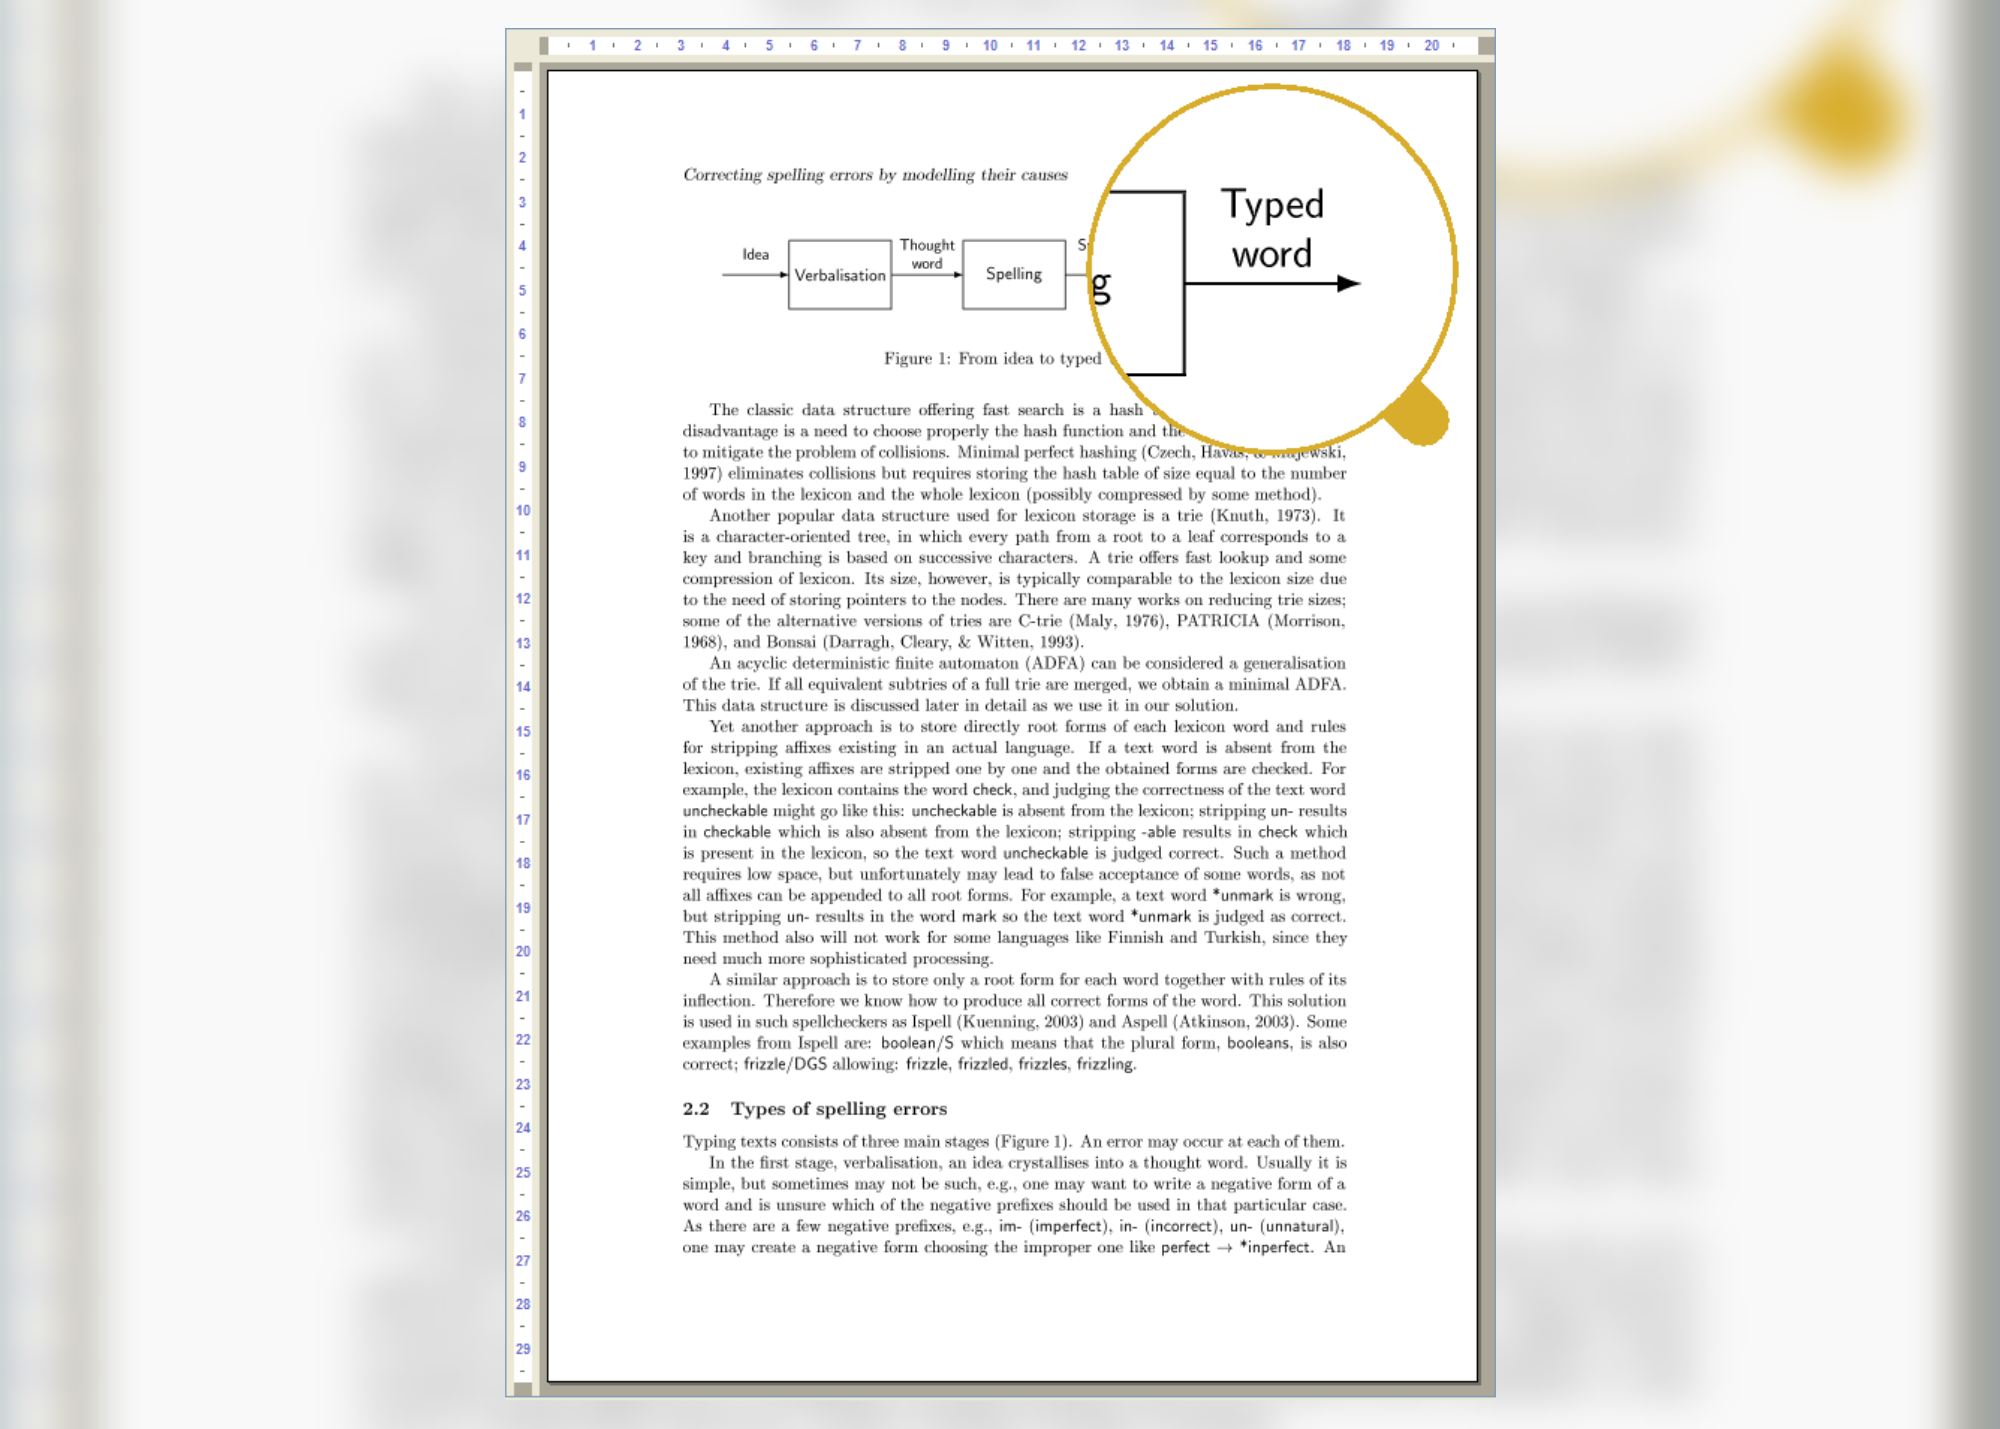 A draft with a graphic organizer and magnified text "Typed Word" 